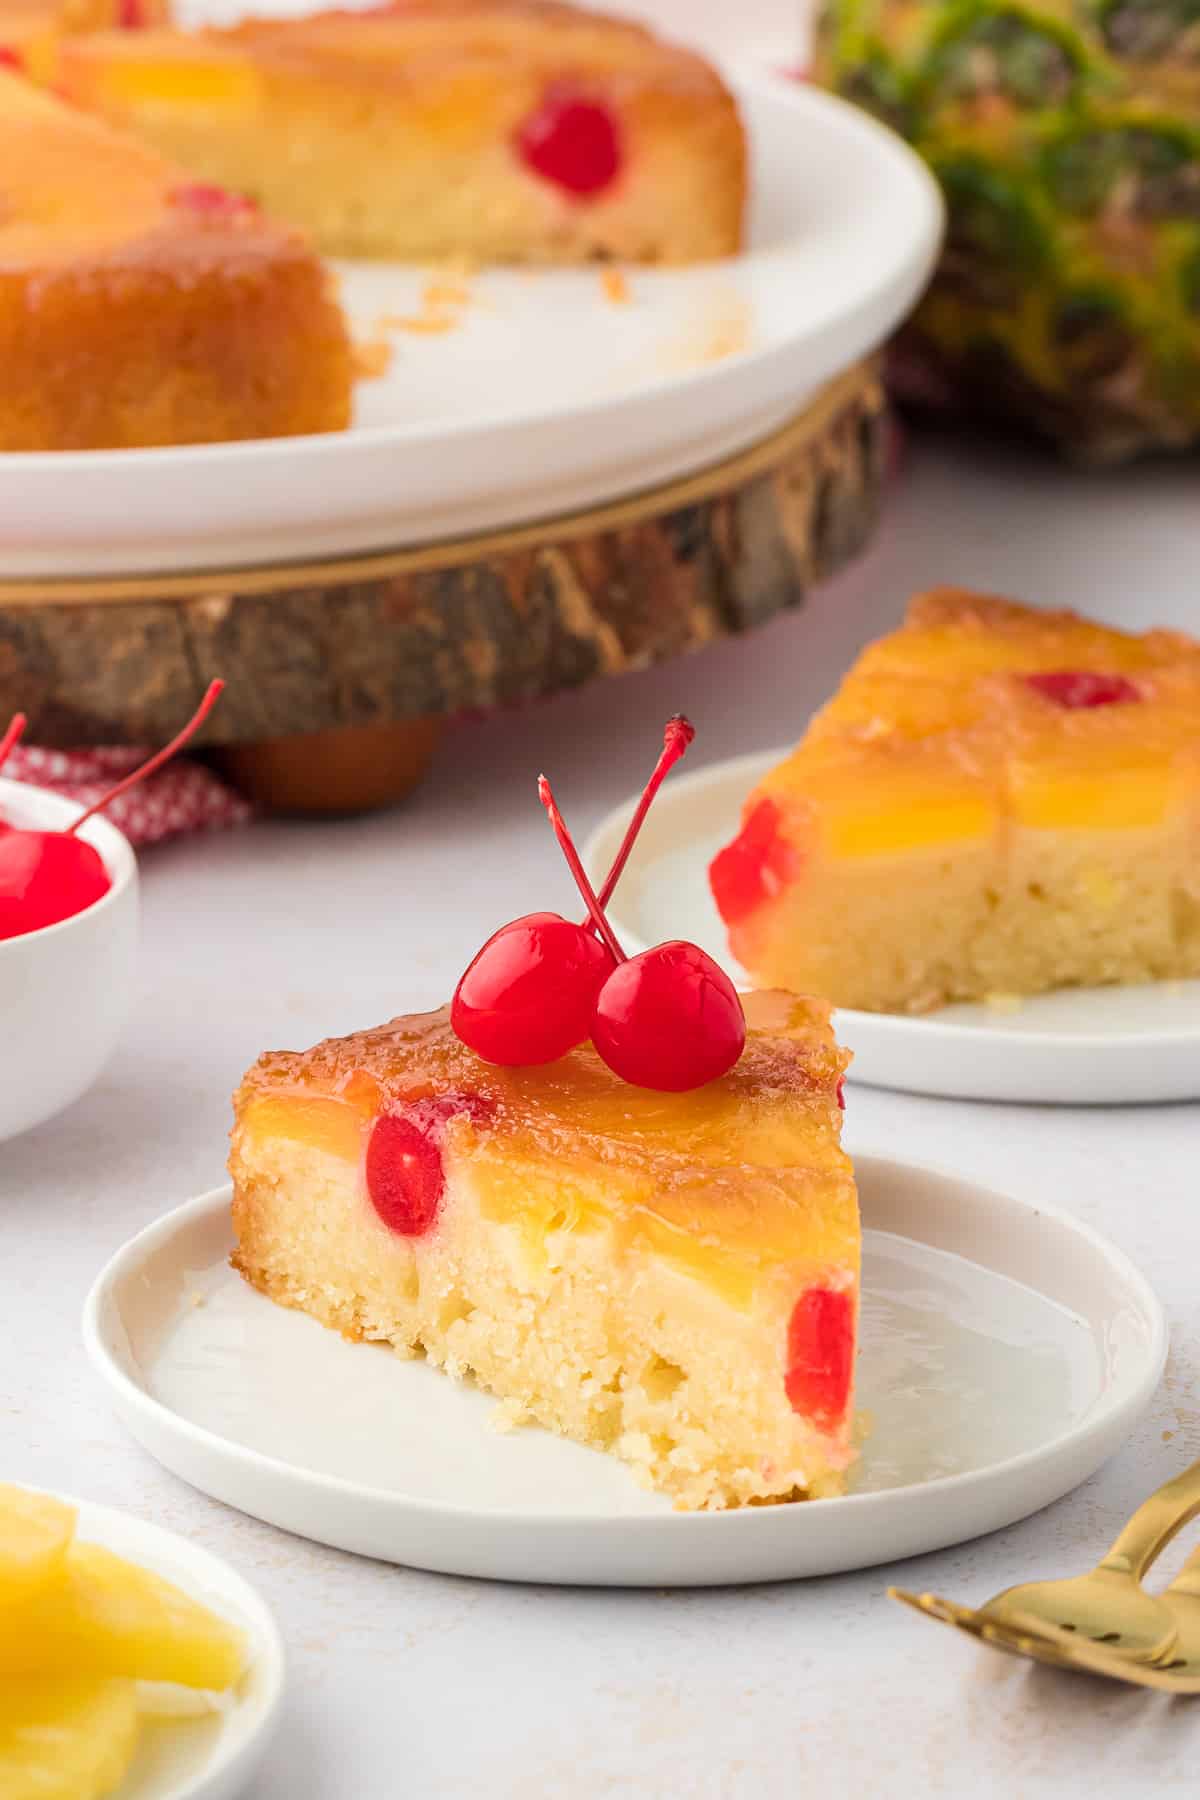 two small white plates with pineapple upside down cake slices on them arranged in front of a large plate with the rest of the cake, two gold forks, pineapple slices and a small white bowl of cherries